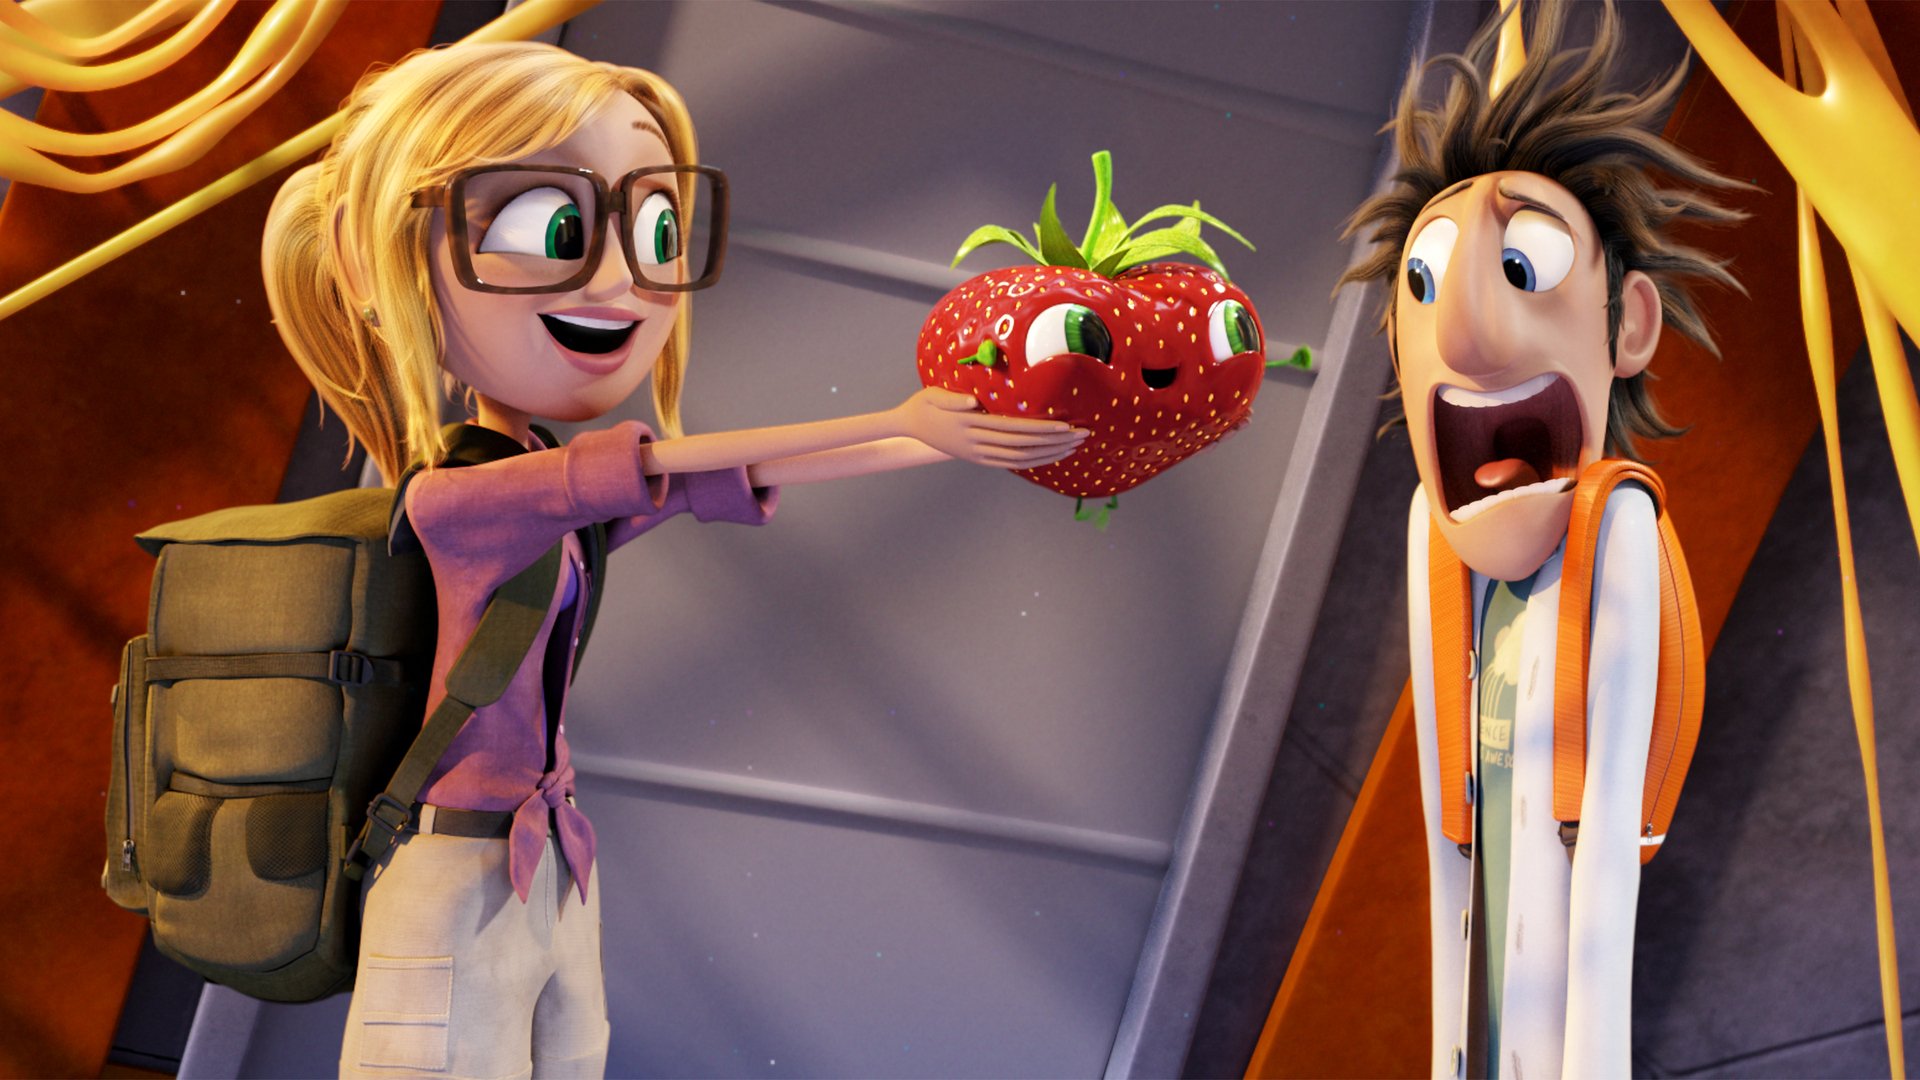 Cloudy with a Chance of Meatballs 2 Une Sous-Galerie par: cdd.